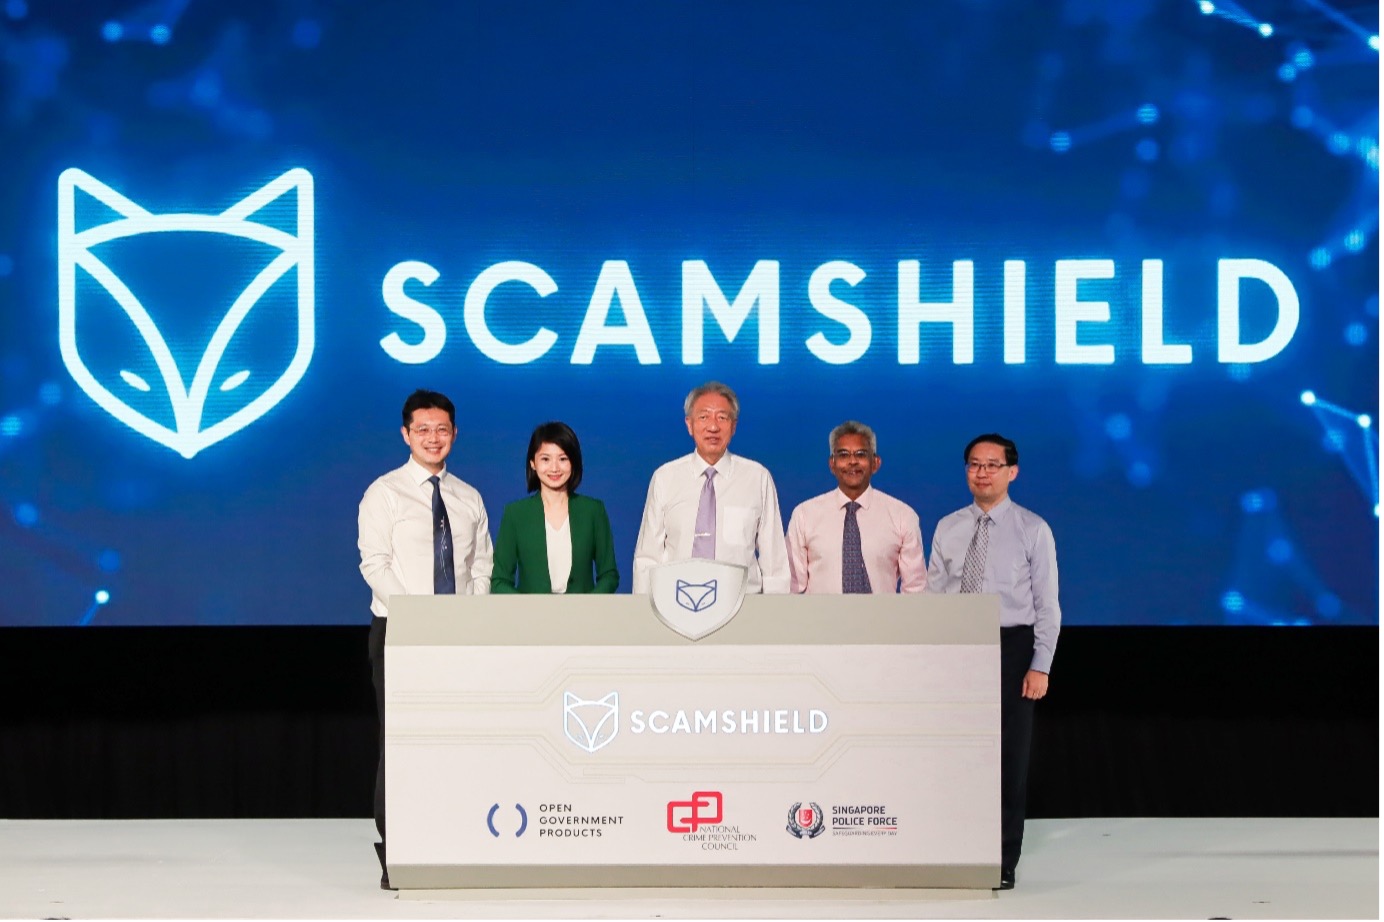 20220928_scamshield_android_launched_at_ncpc_40th_anniversary_event_1